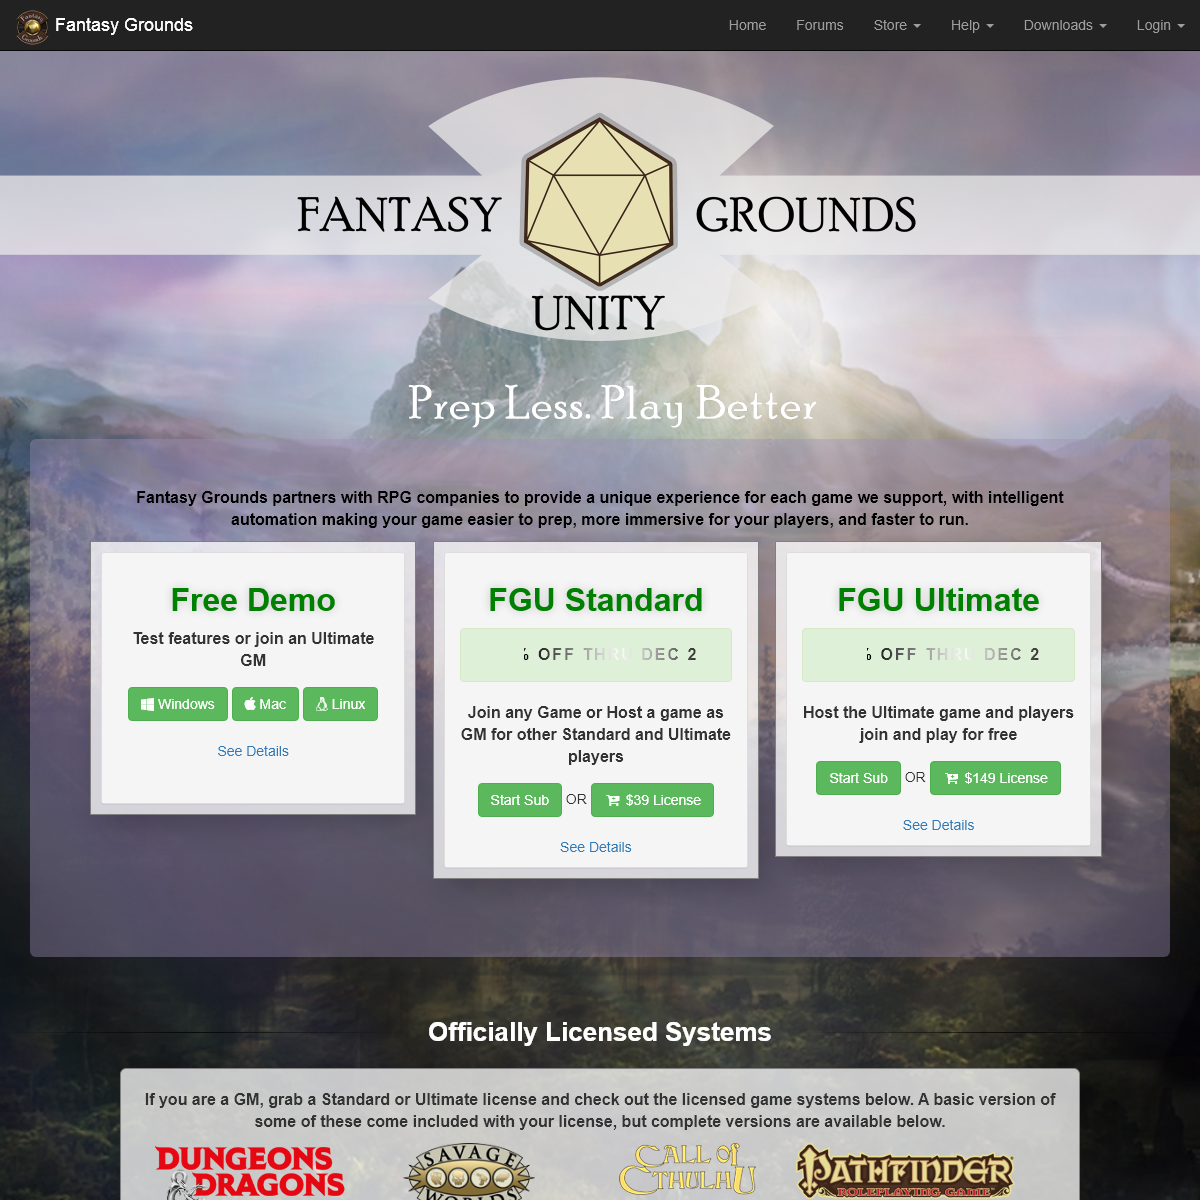 A complete backup of fantasygrounds.com